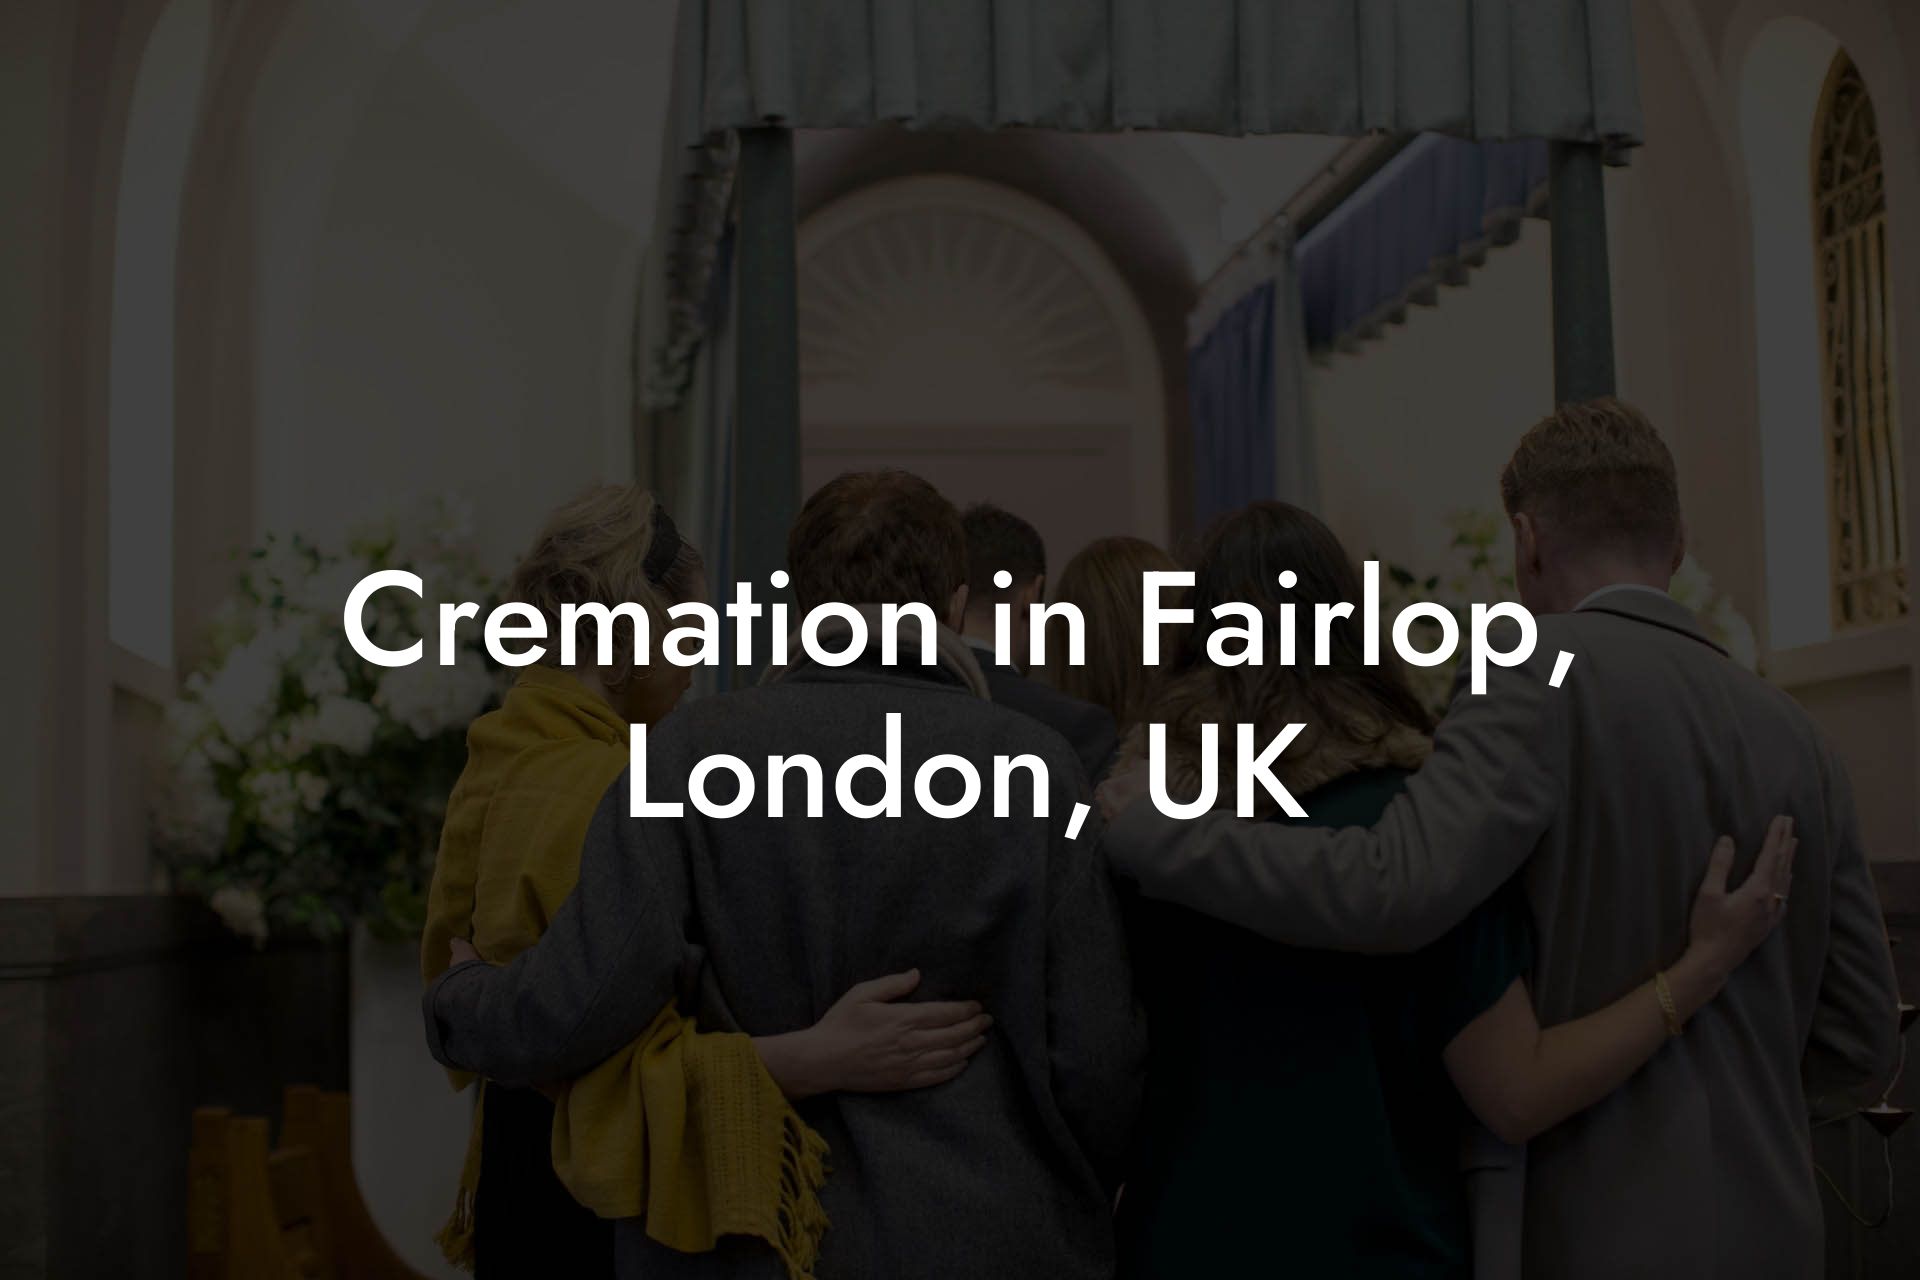 Cremation in Fairlop, London, UK